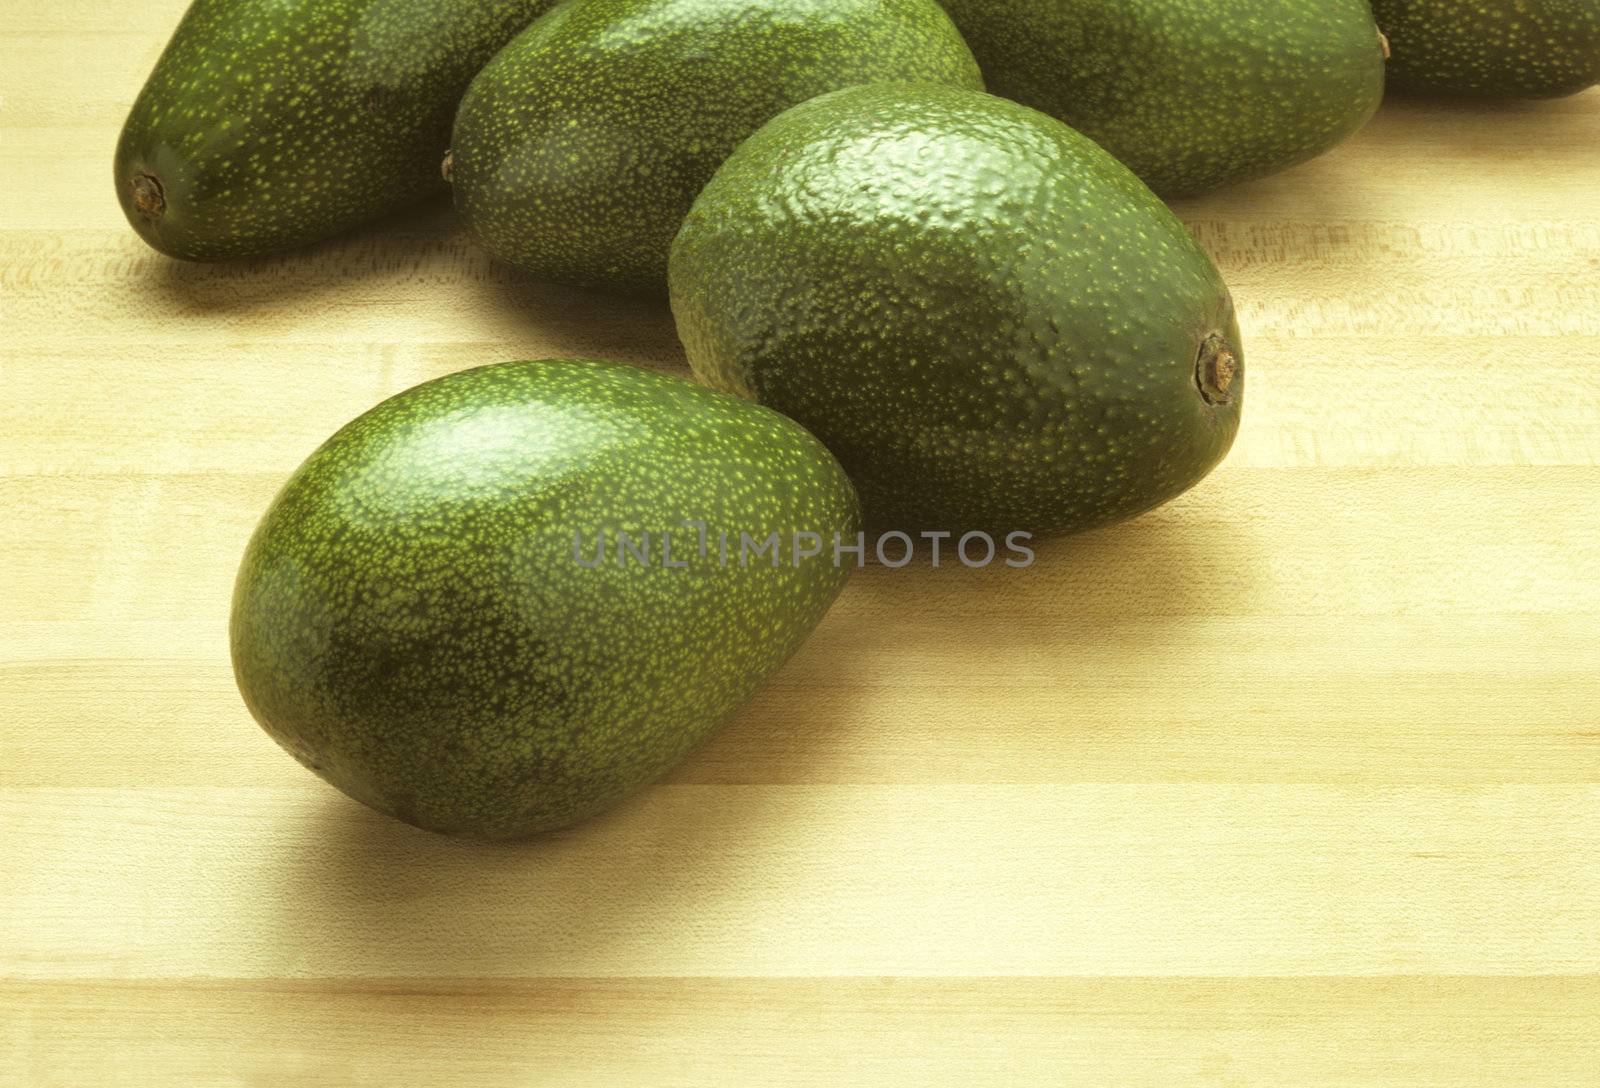 Avocados on a cutting board by Balefire9